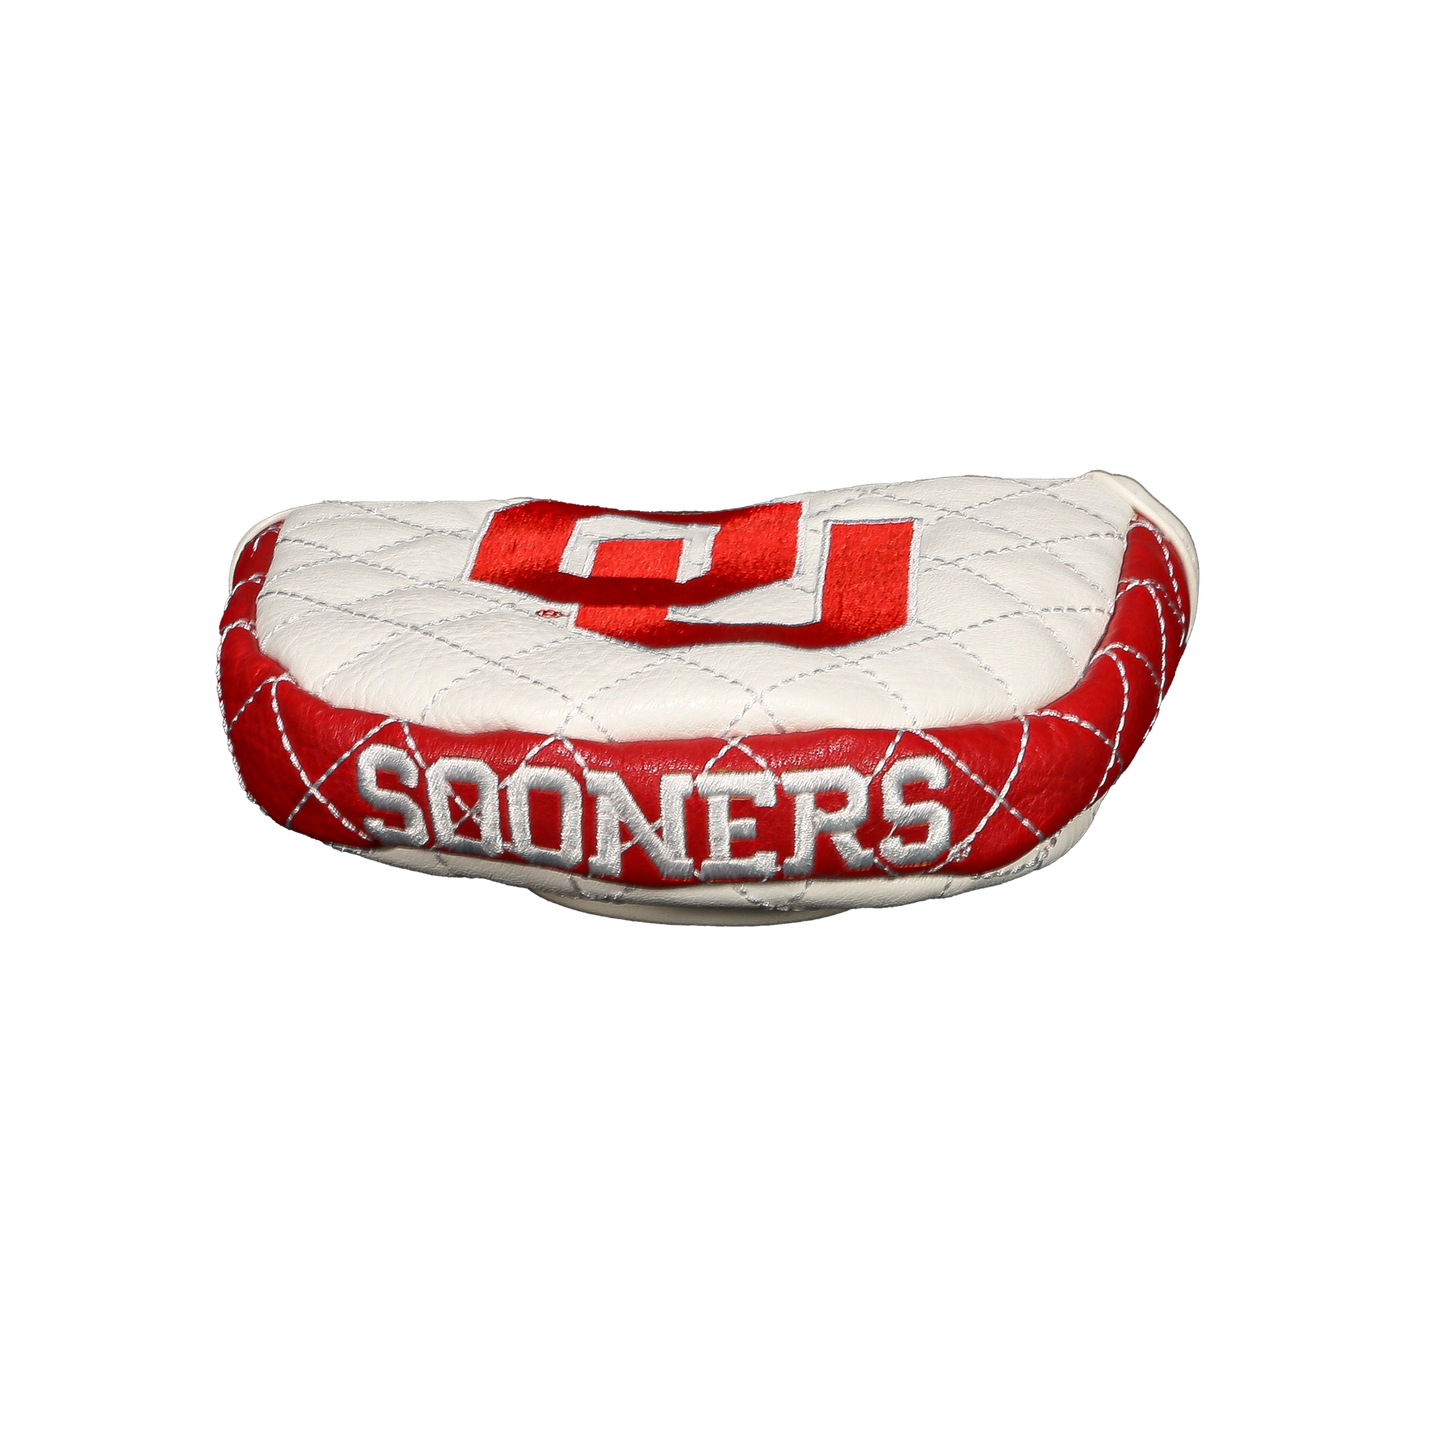 Oklahoma "Sooners" Mallet Putter Cover